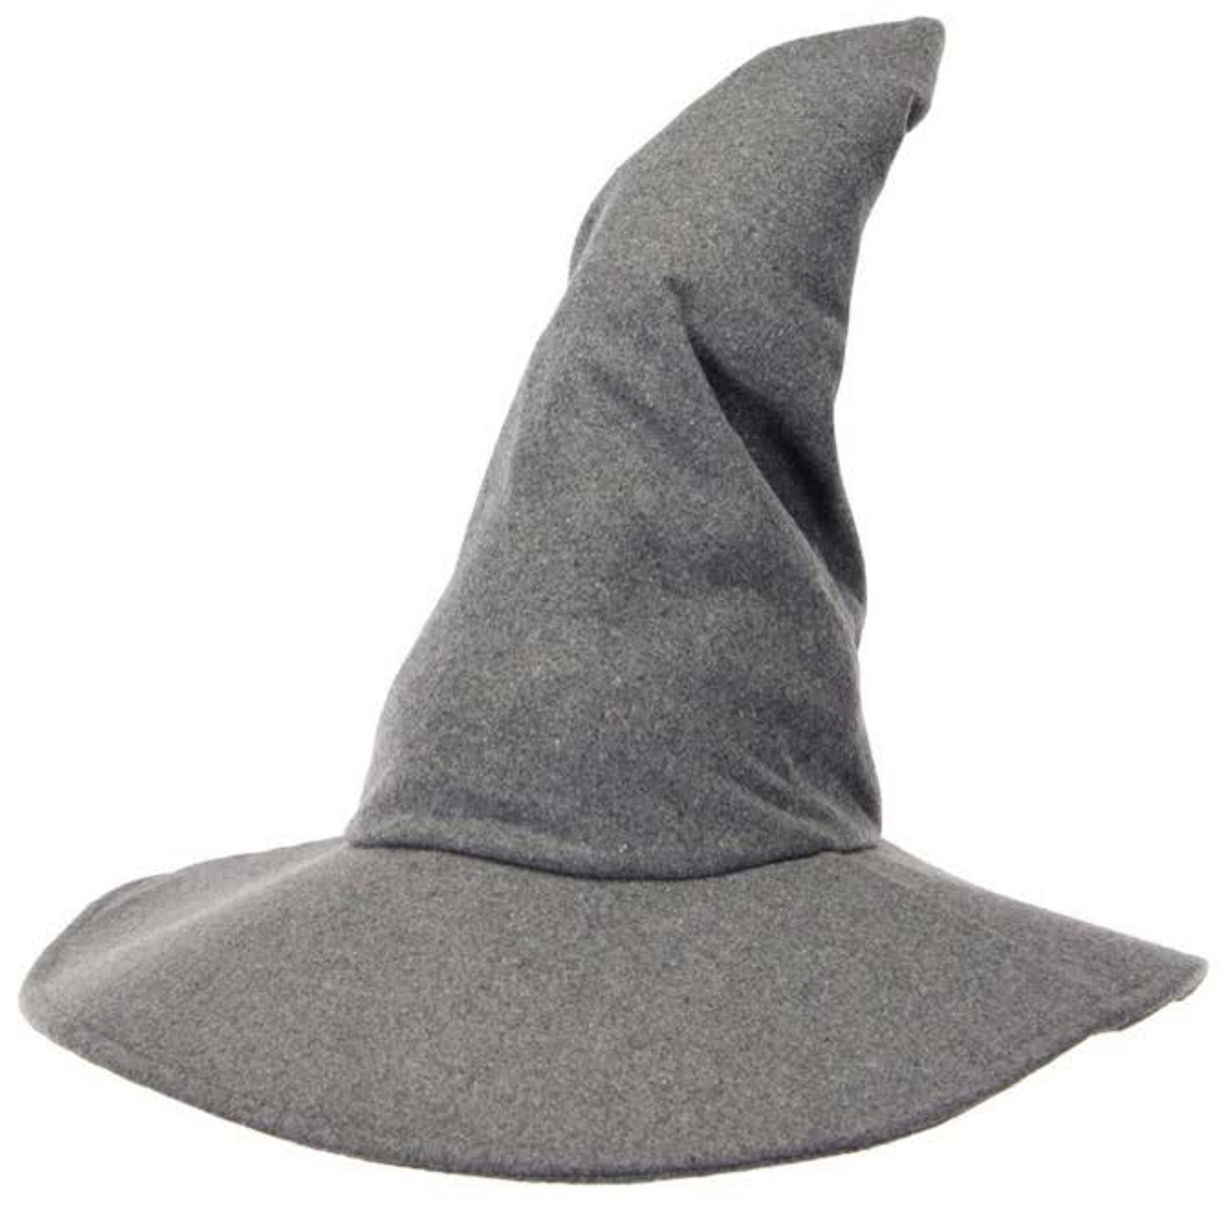 Gandalf the Grey Wizard Hat has a flexible point and large brim with a small hidden pocket inside and an adjustable strap